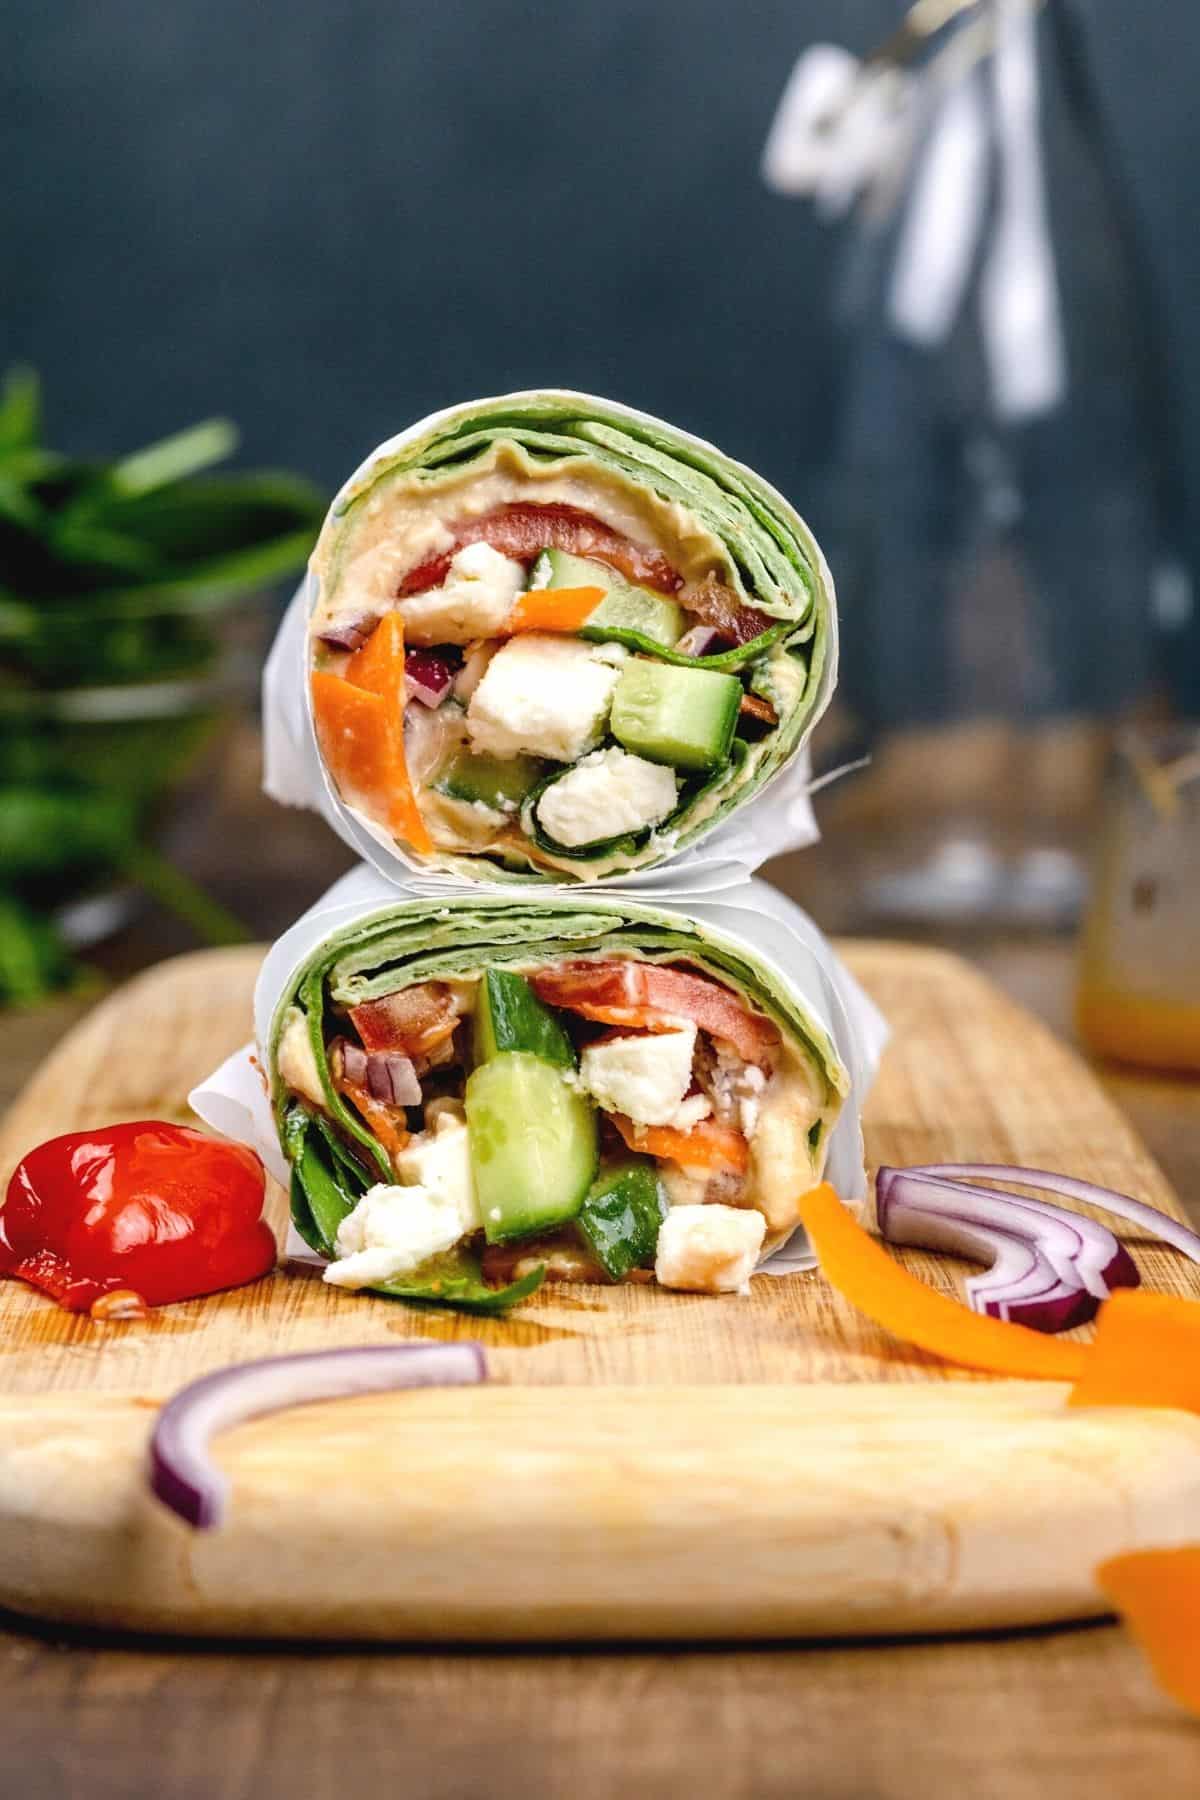 A stacked veggie wrap with veggies overflowing in the wrap and onto the wood cutting board. More veggies and a glass bottle are blurred in the background.